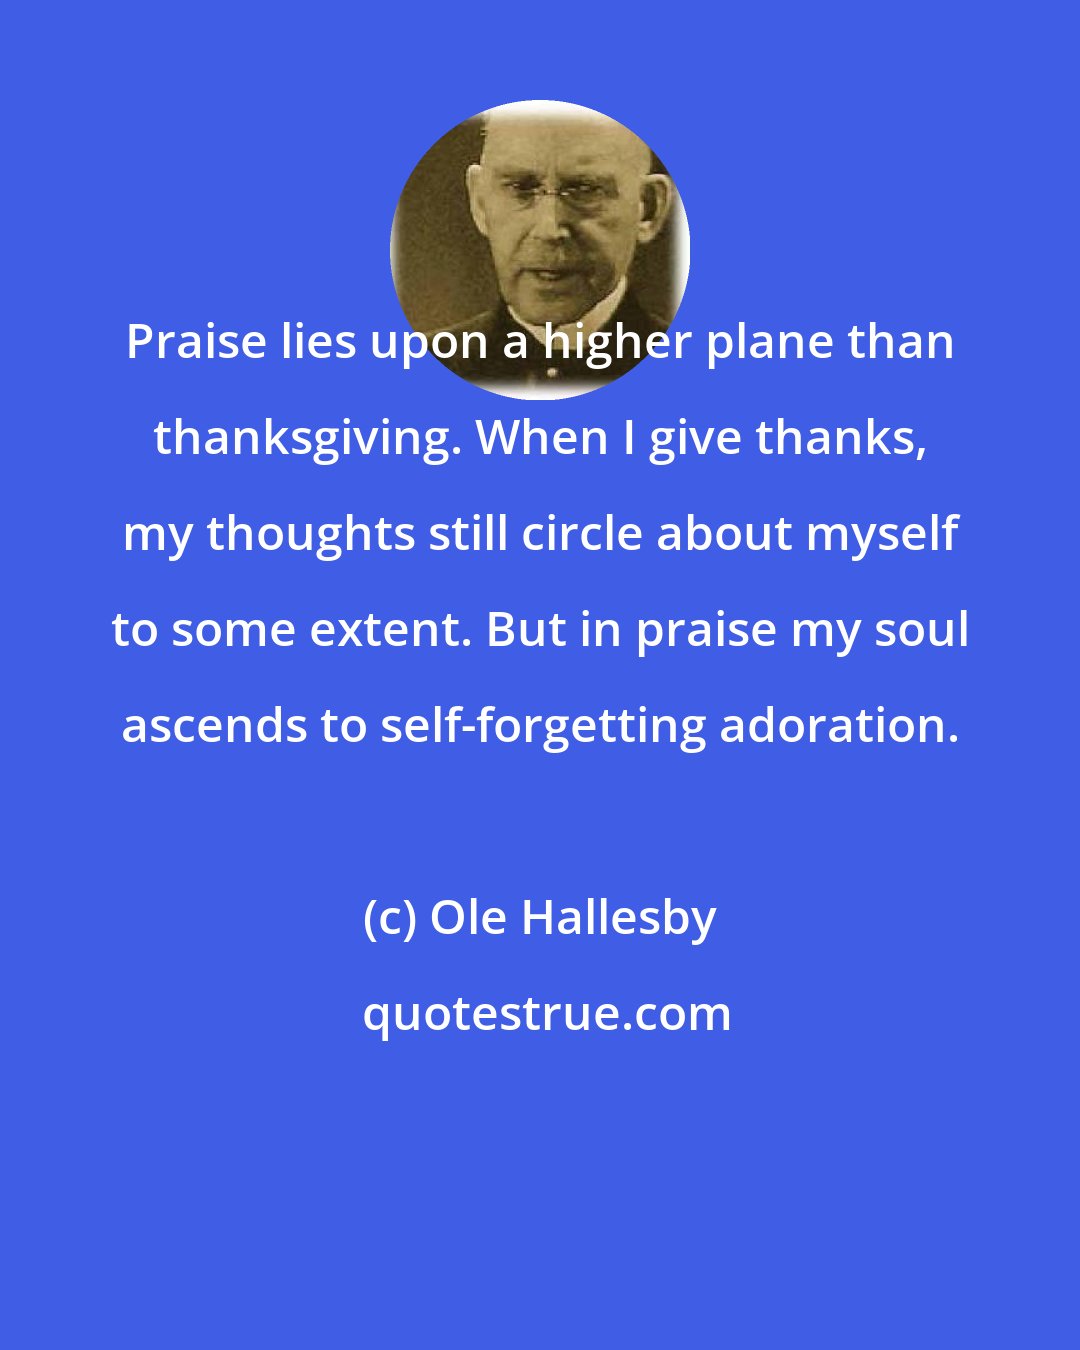 Ole Hallesby: Praise lies upon a higher plane than thanksgiving. When I give thanks, my thoughts still circle about myself to some extent. But in praise my soul ascends to self-forgetting adoration.